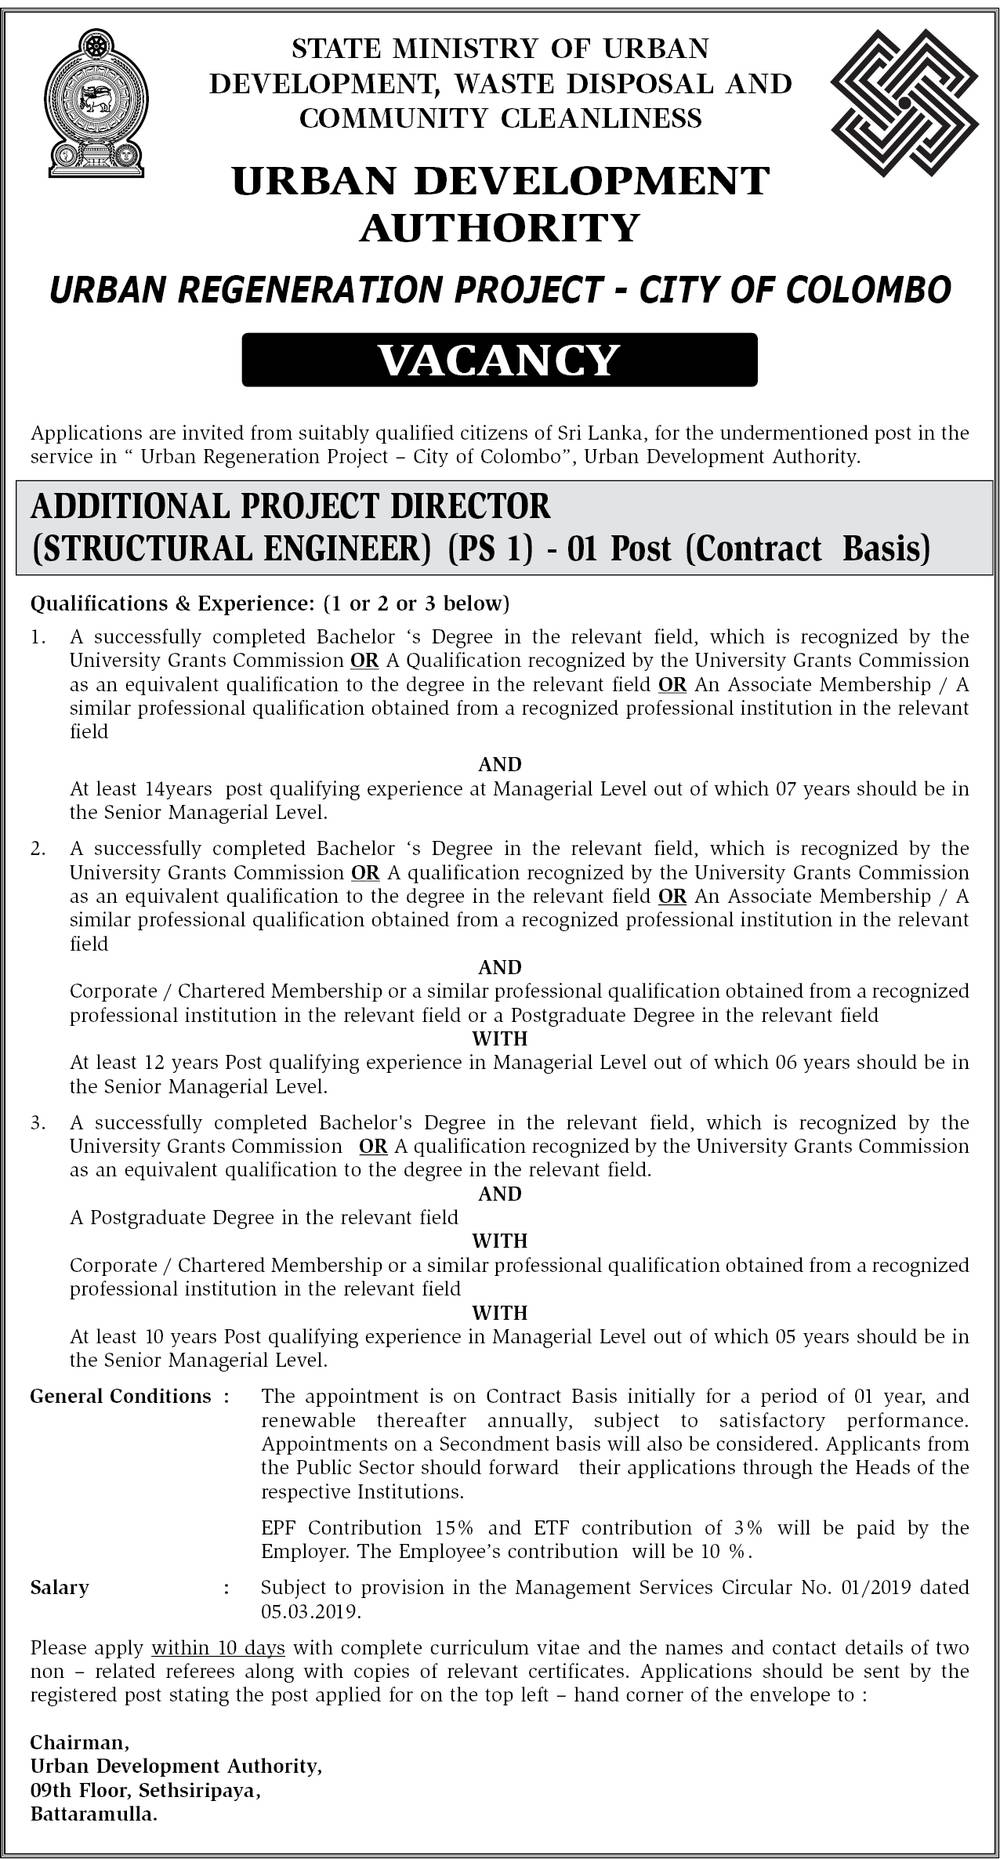 Additional Project Director - Urban Development Authority English